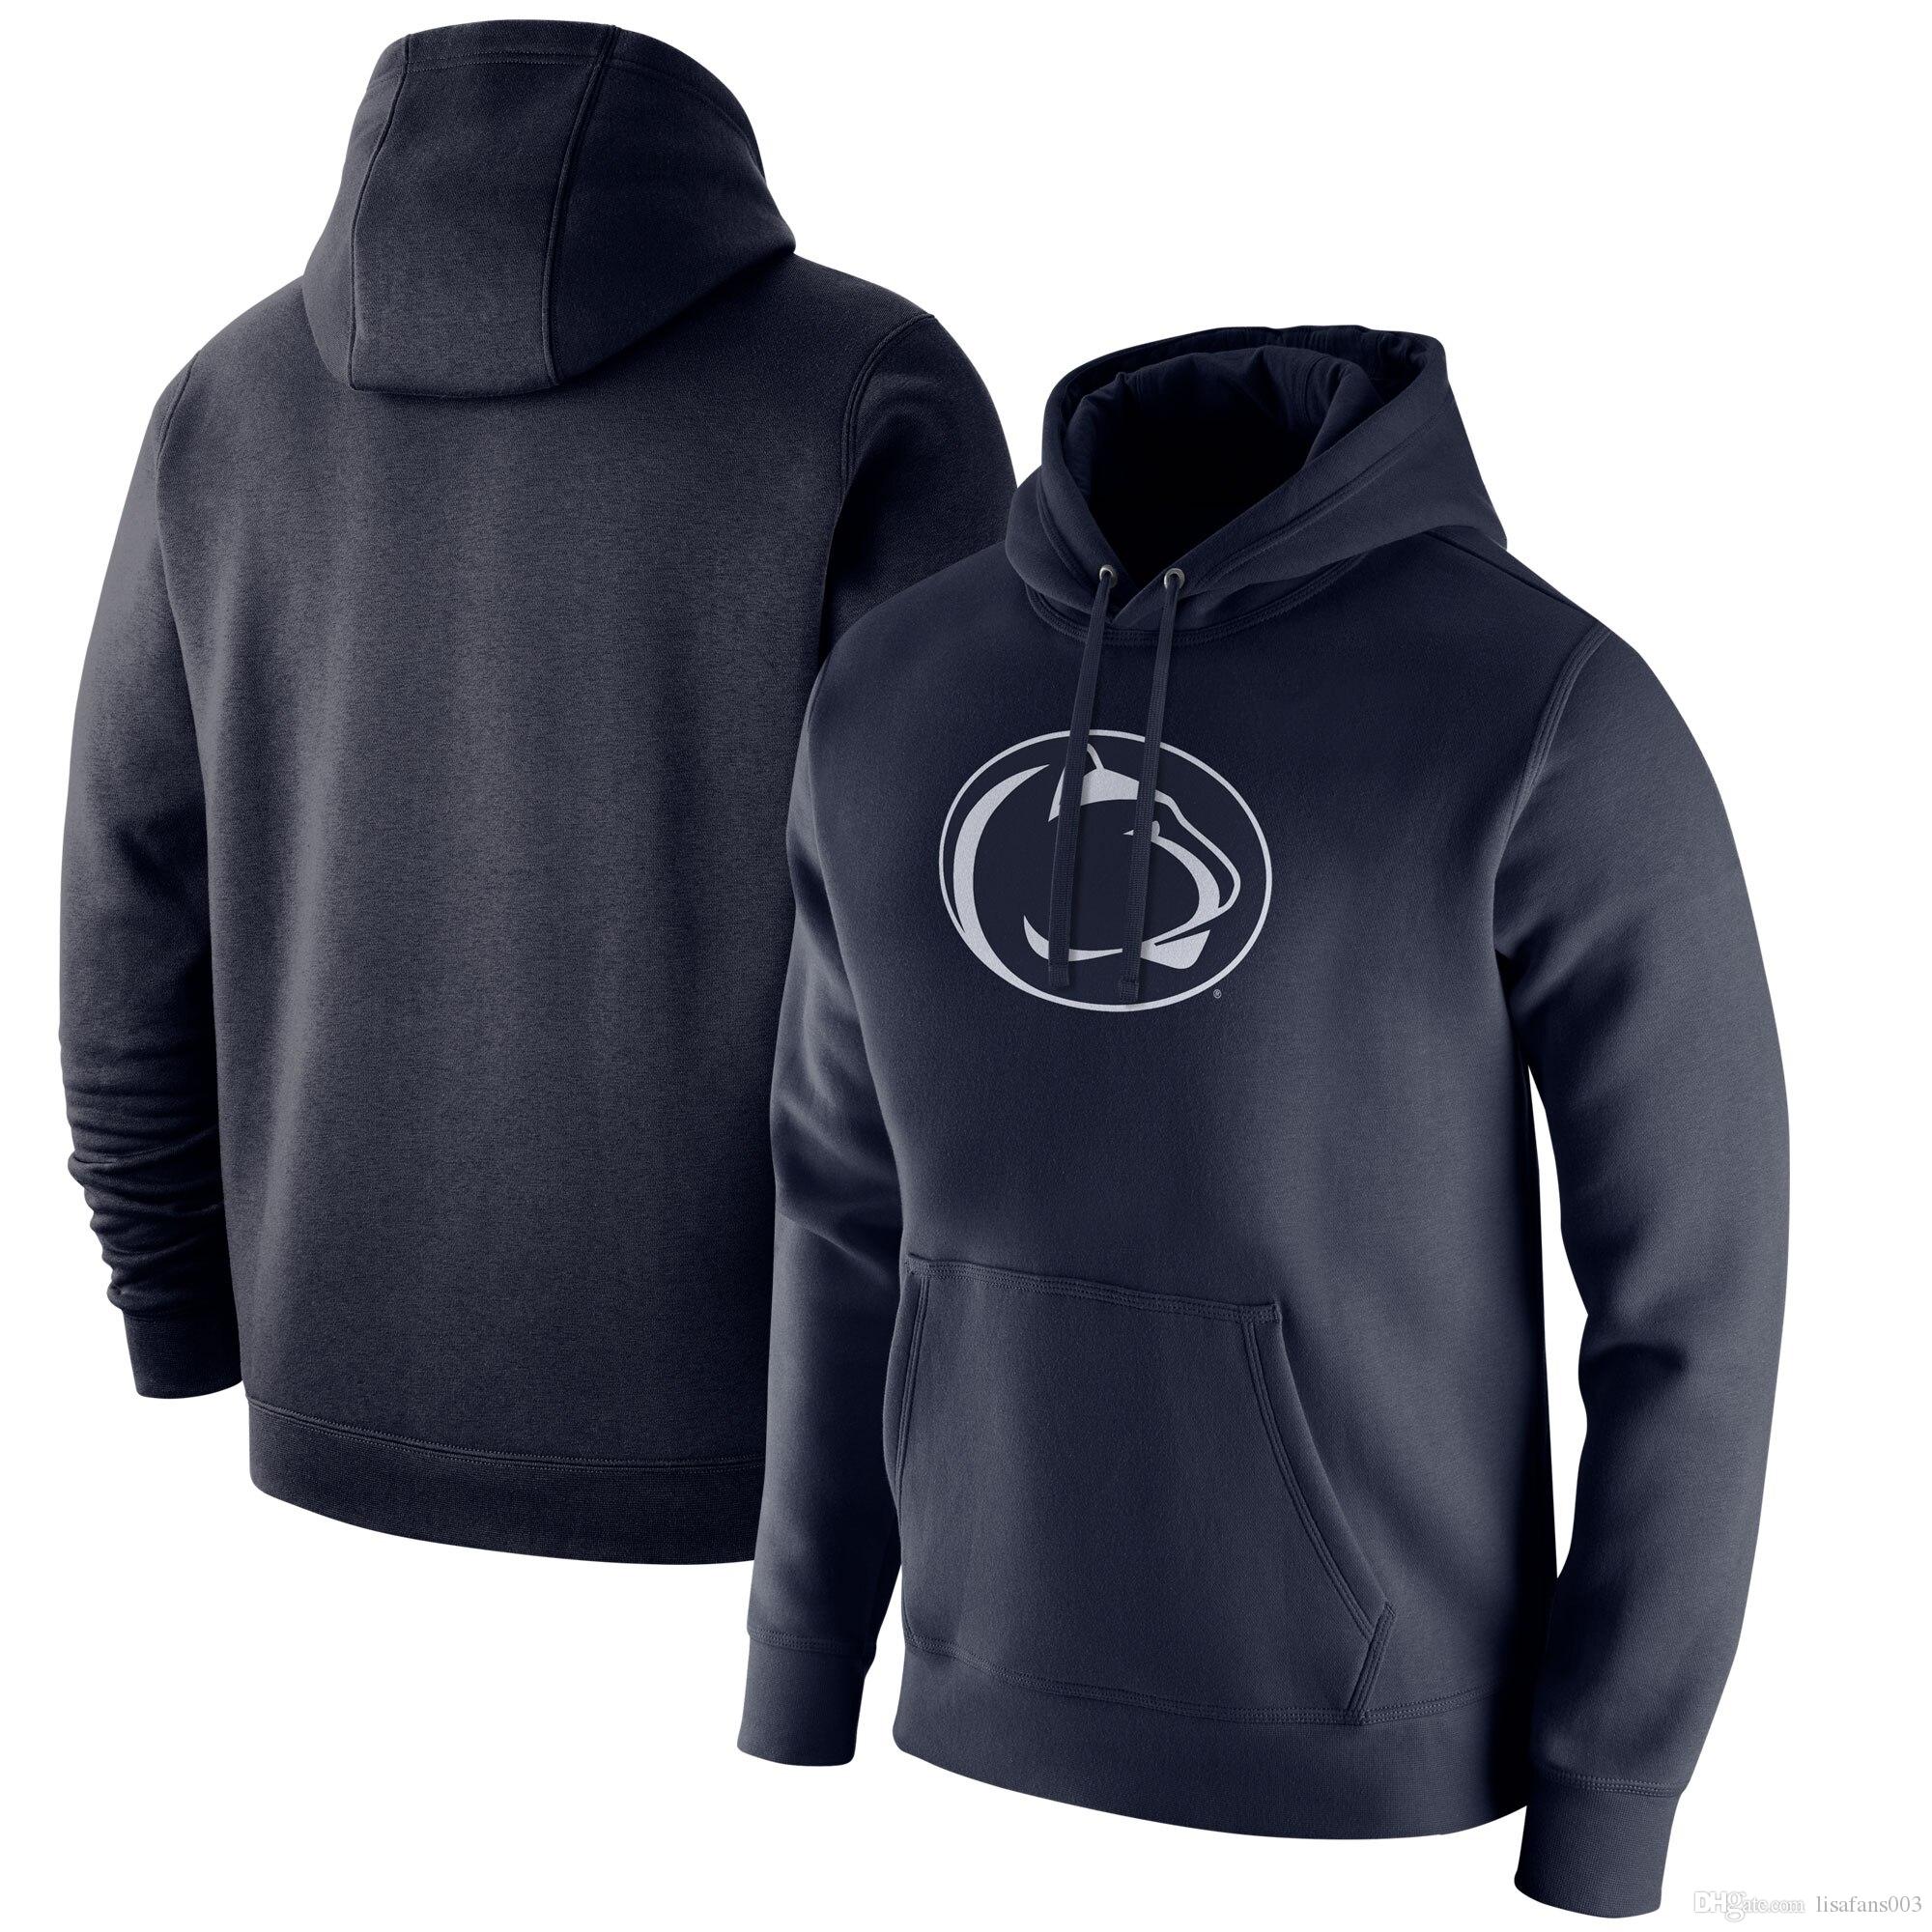 Penn State Nittany Lions Navy Wake Forest Demon Deacons Club Fleece Pullover Hoodie Washington State Cougars mens Sweatshirt 2021